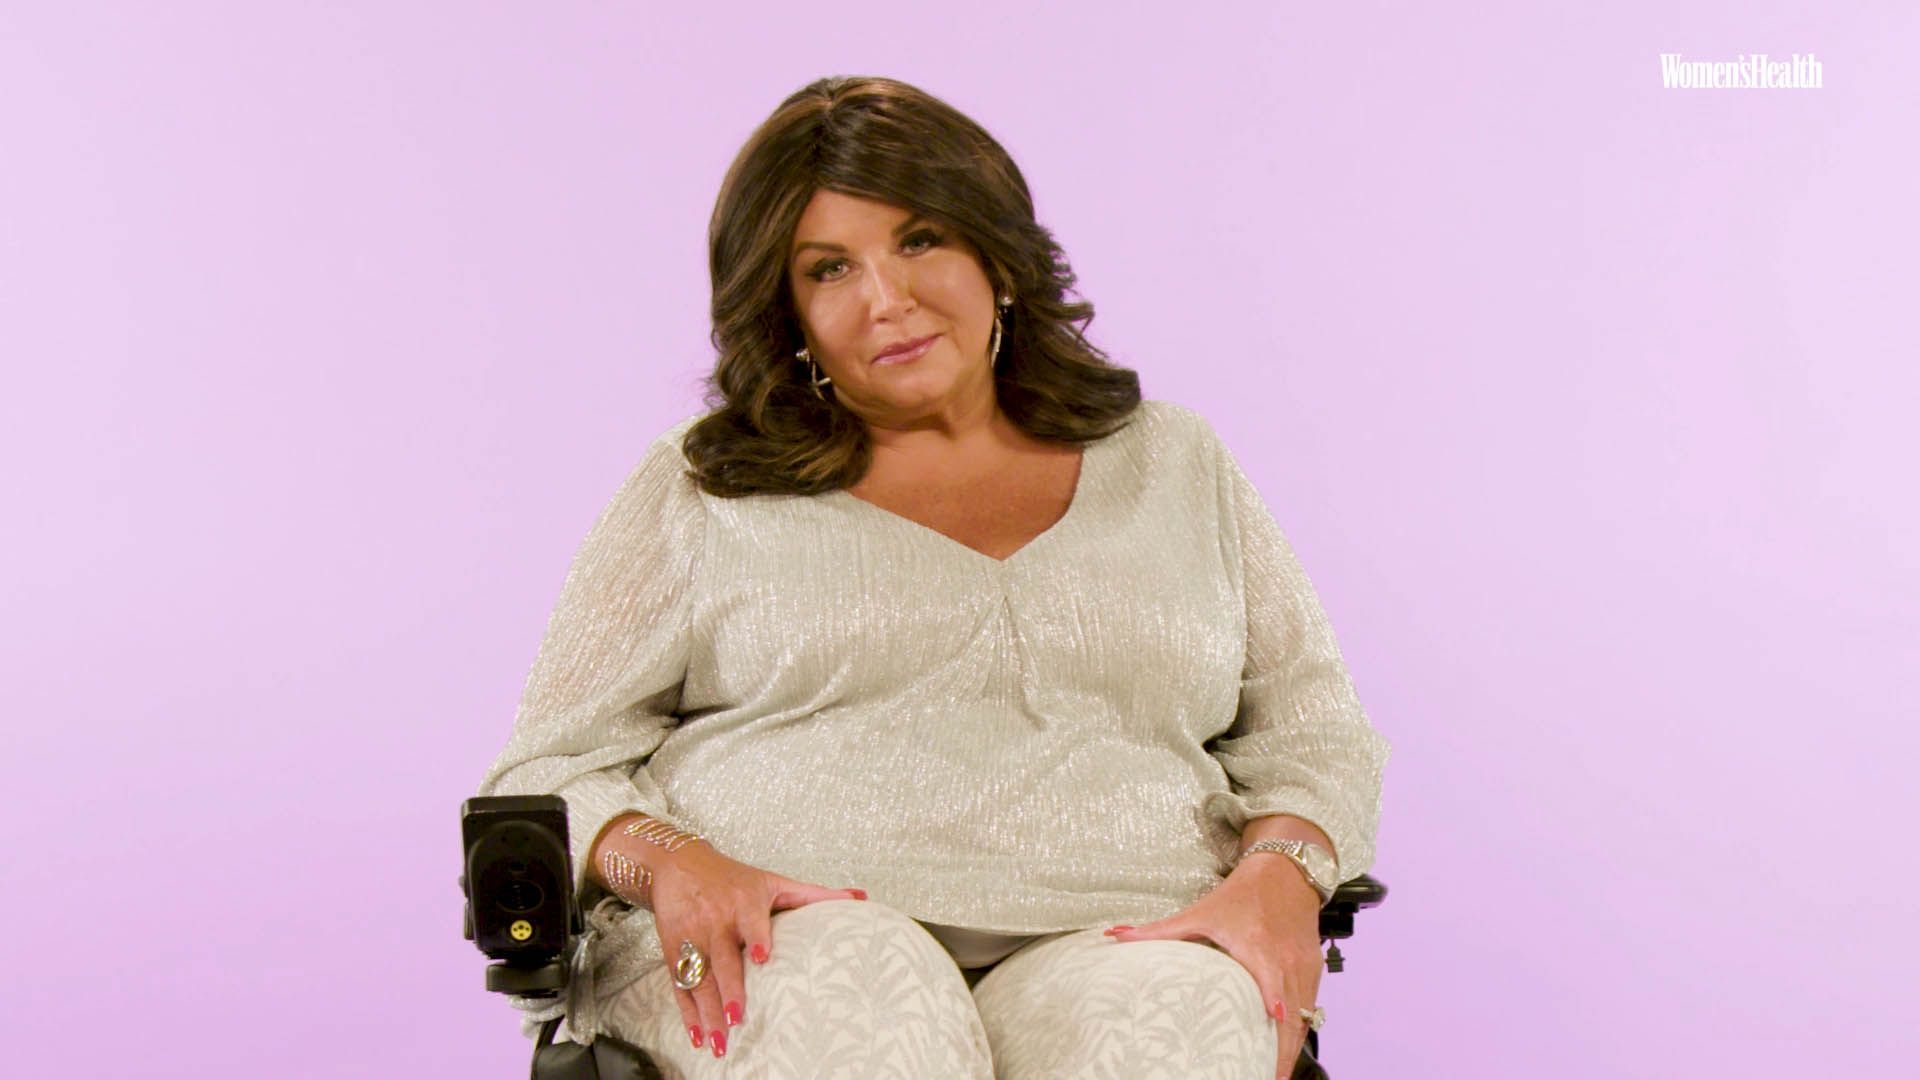 What Happened to Abby Lee Miller? - Cancer Treatment Updates